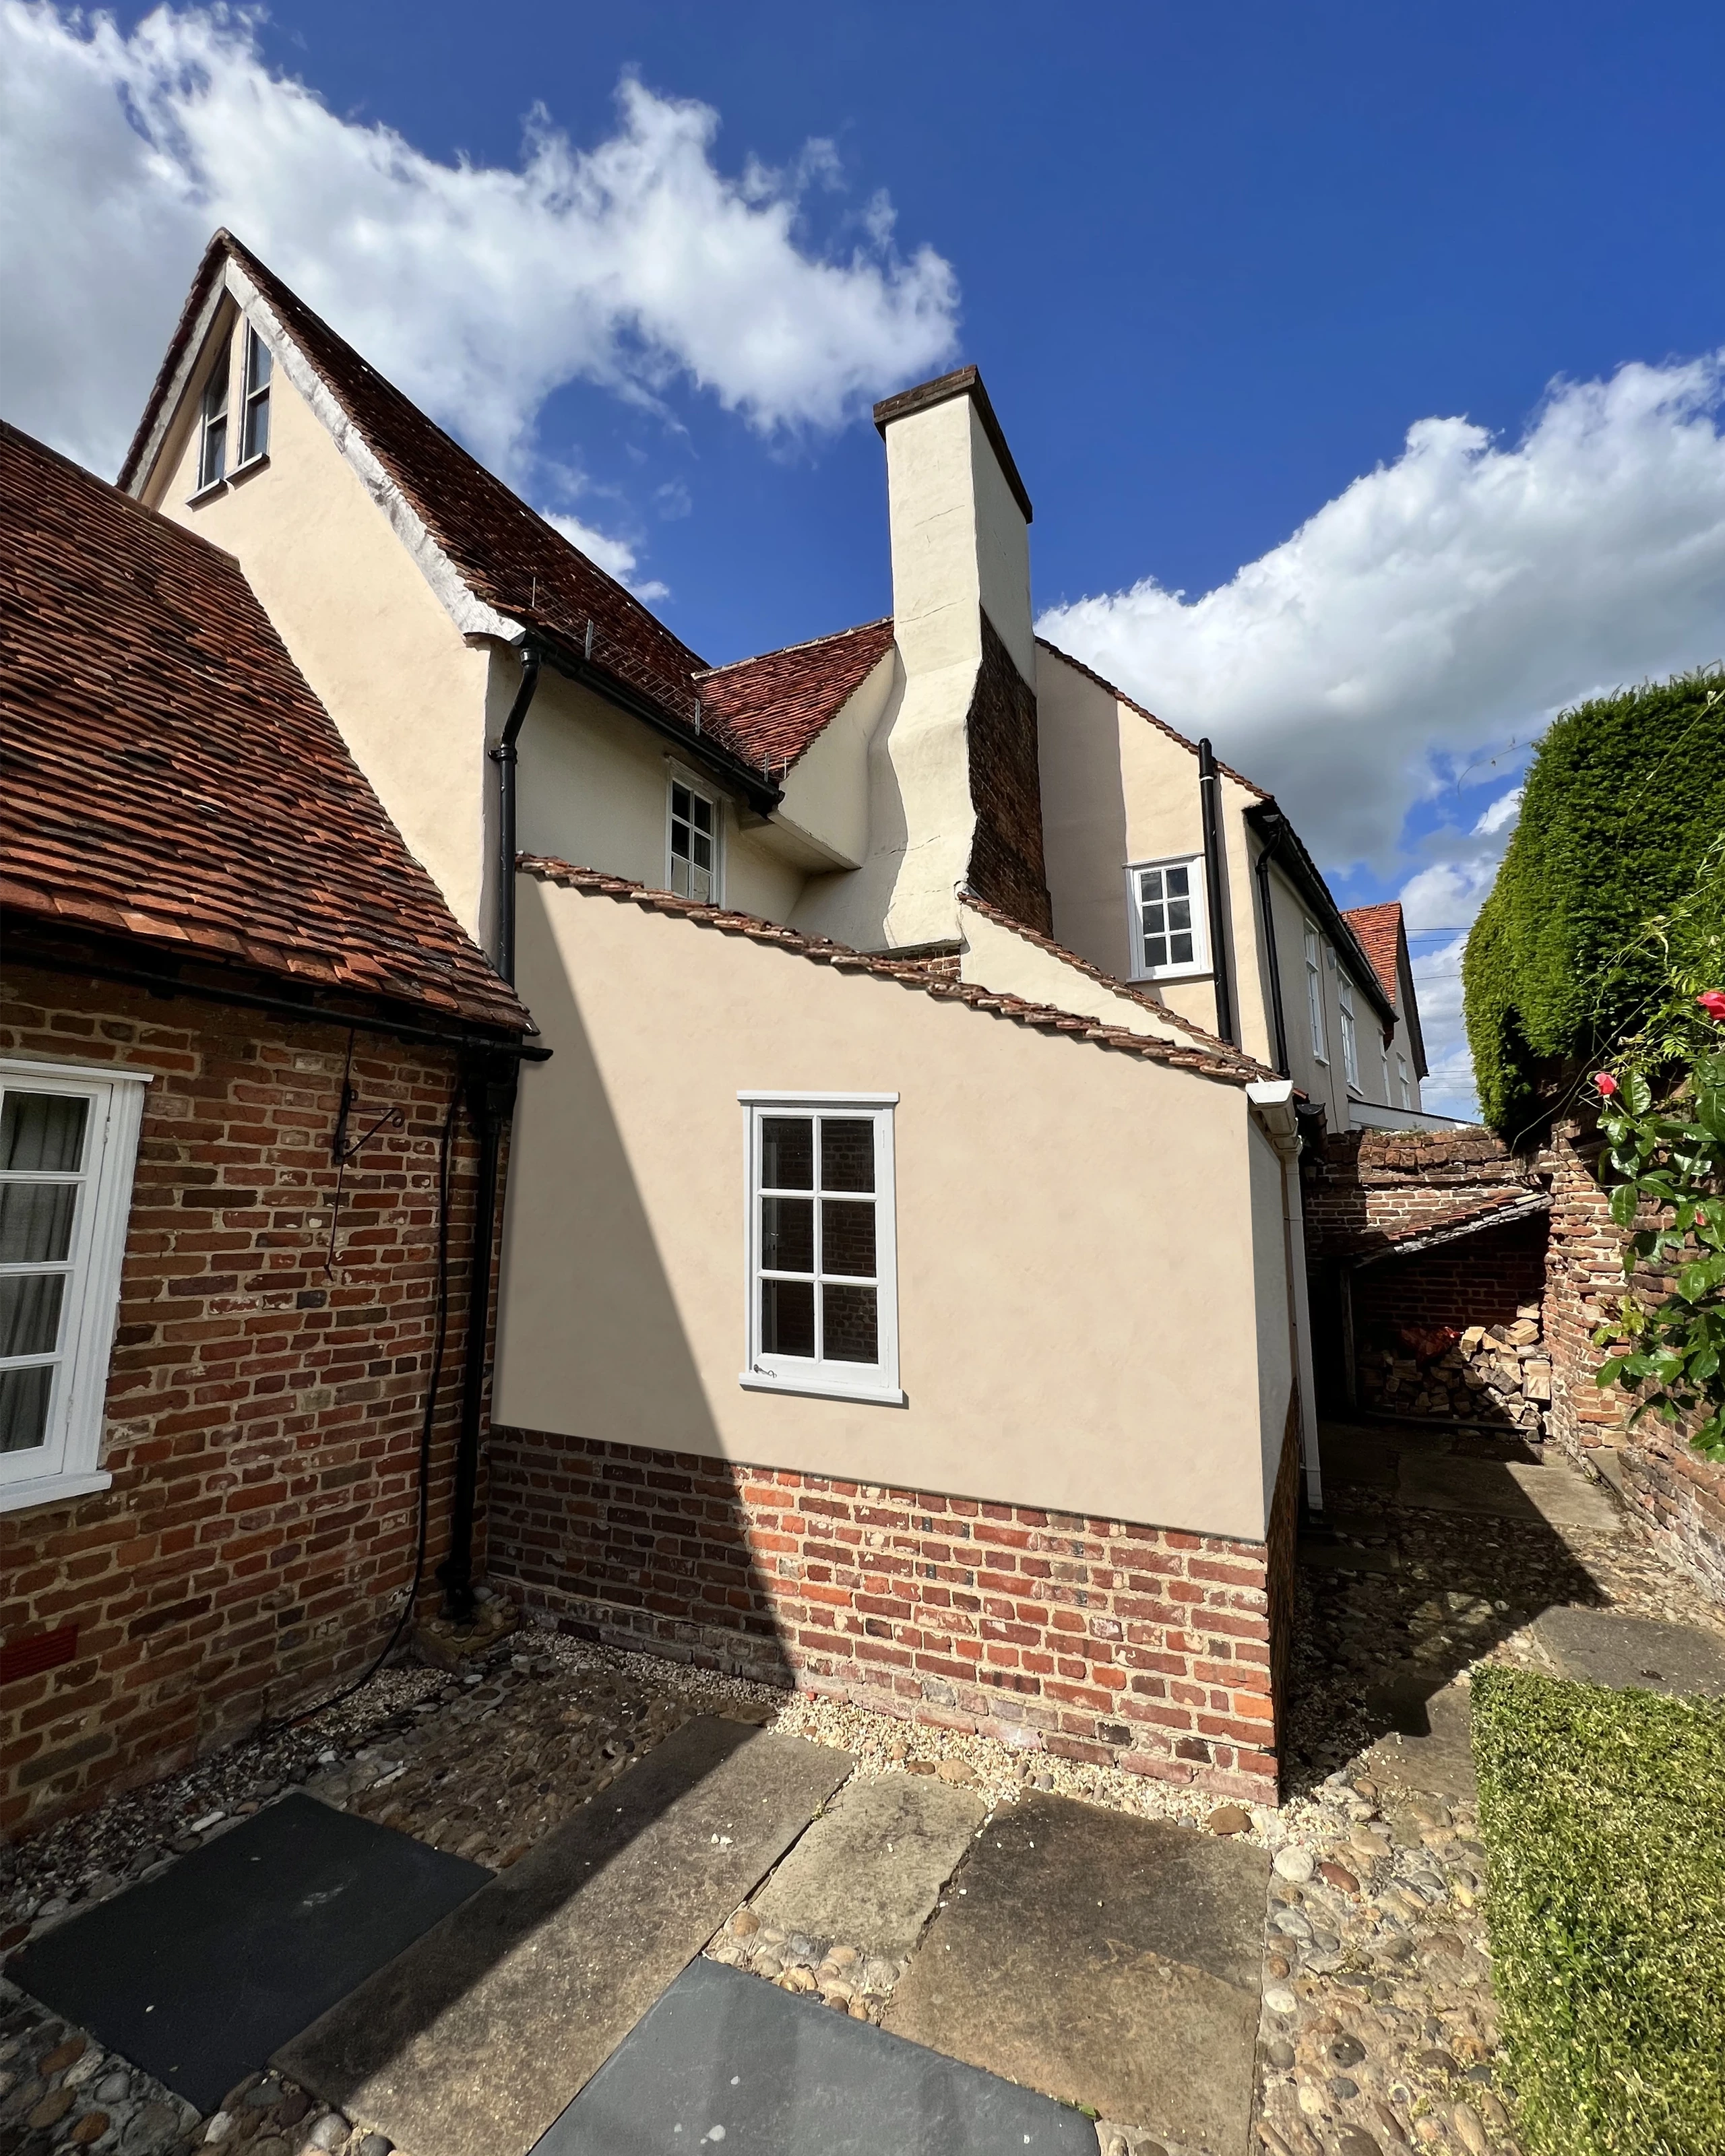 Home Extension on Grade II Listed Property in Hertfordshire